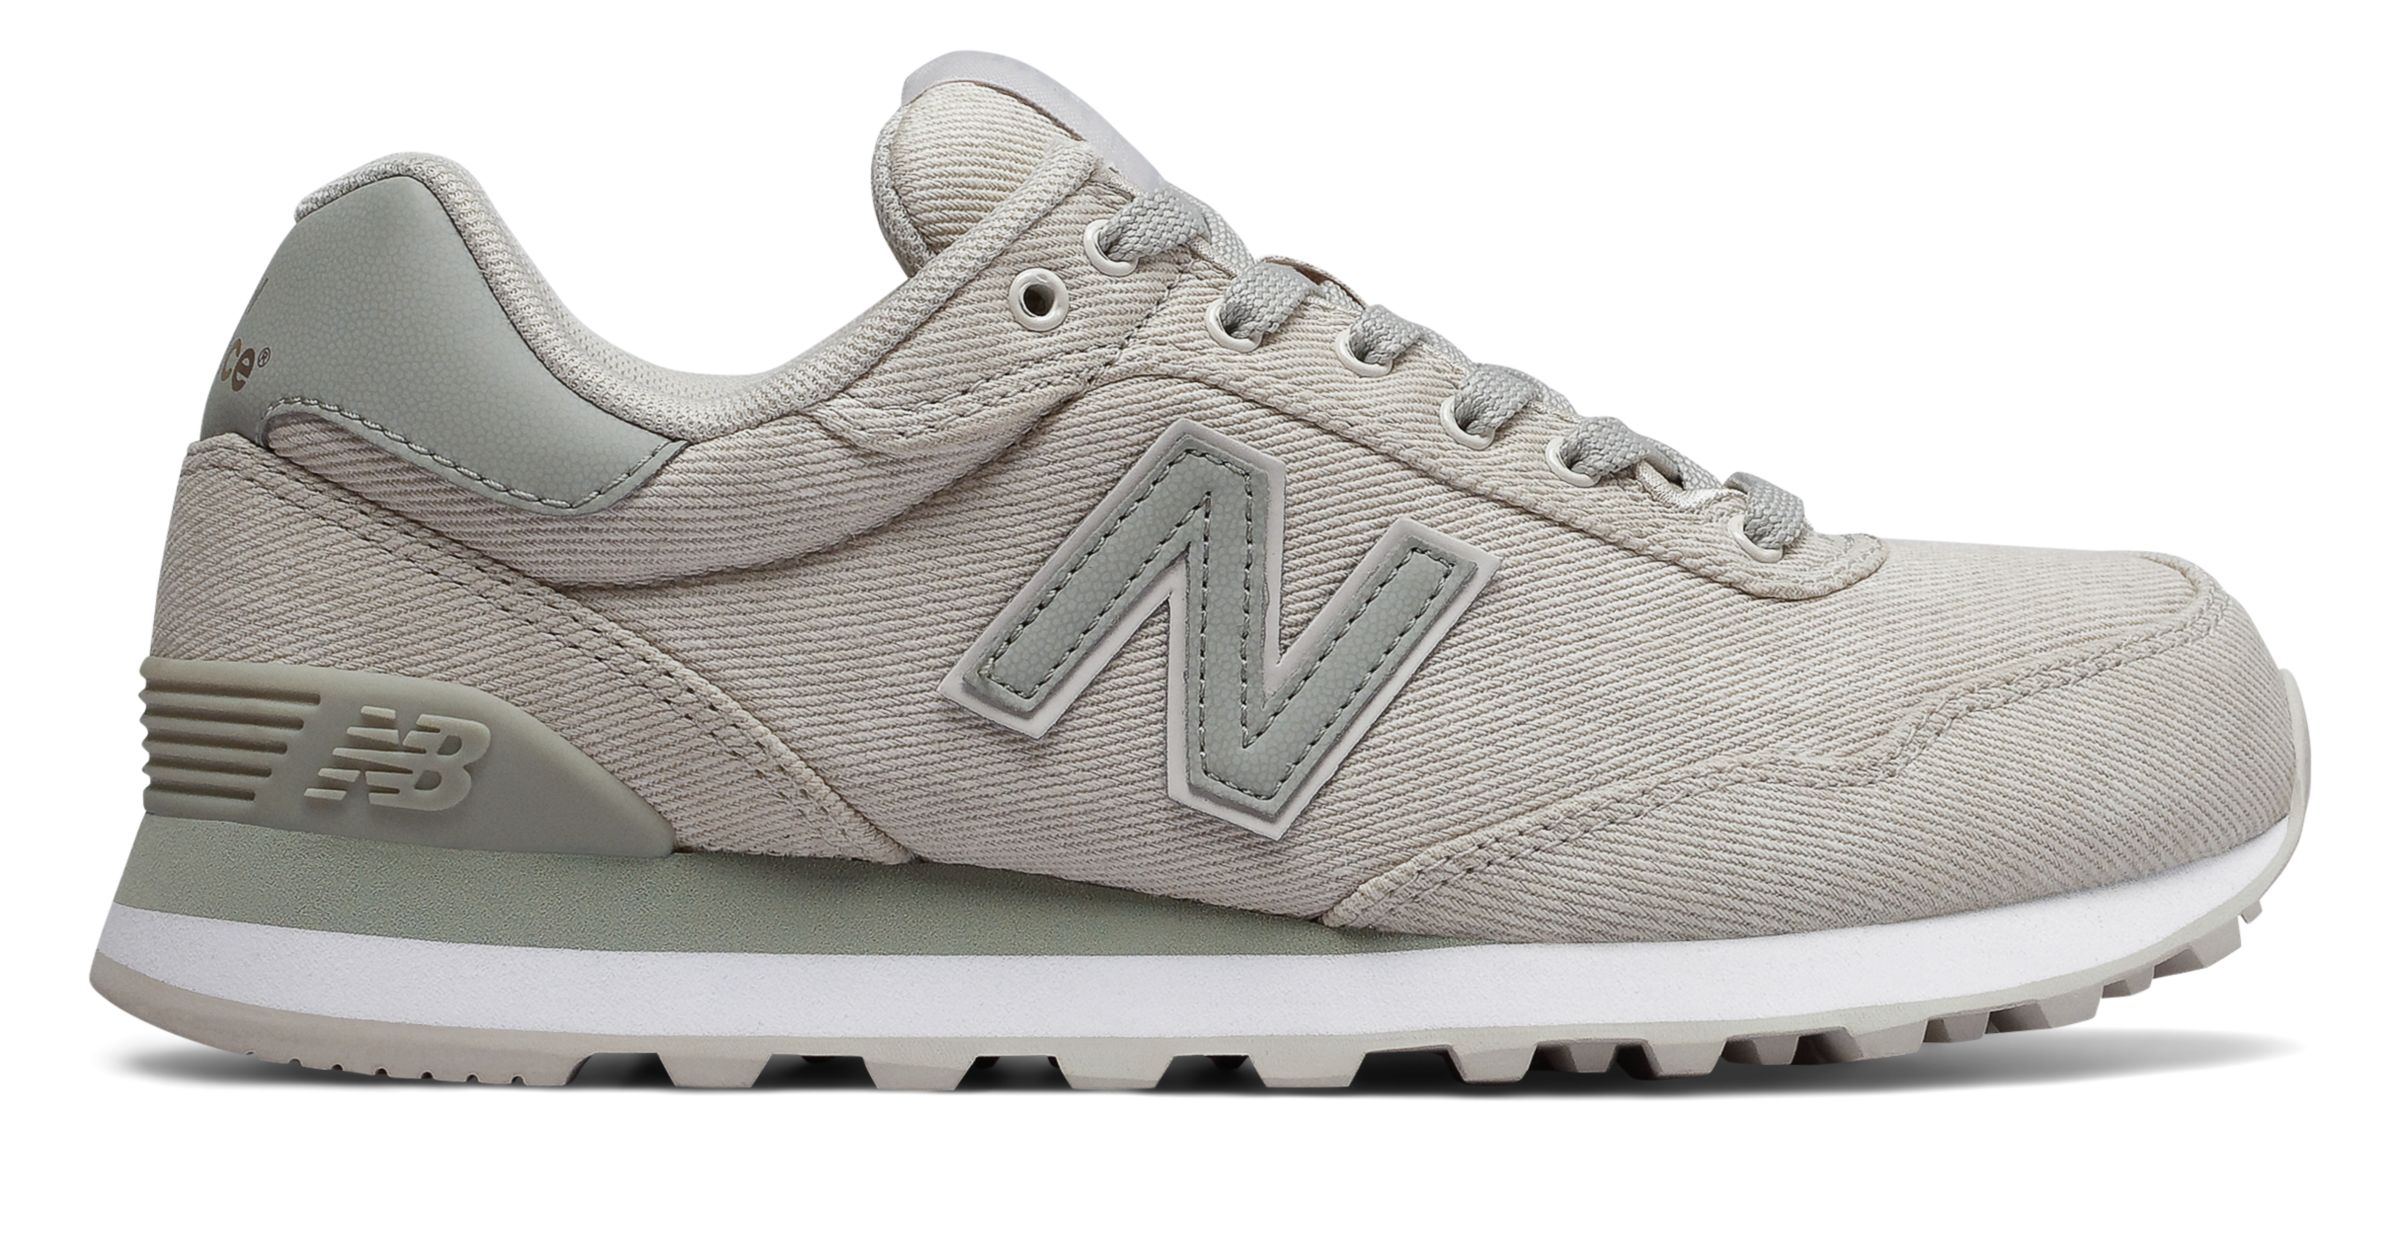 New Balance WL515V1-25072-W on Sale - Discounts Up to 57% Off on WL515BSP  at Joe's New Balance Outlet